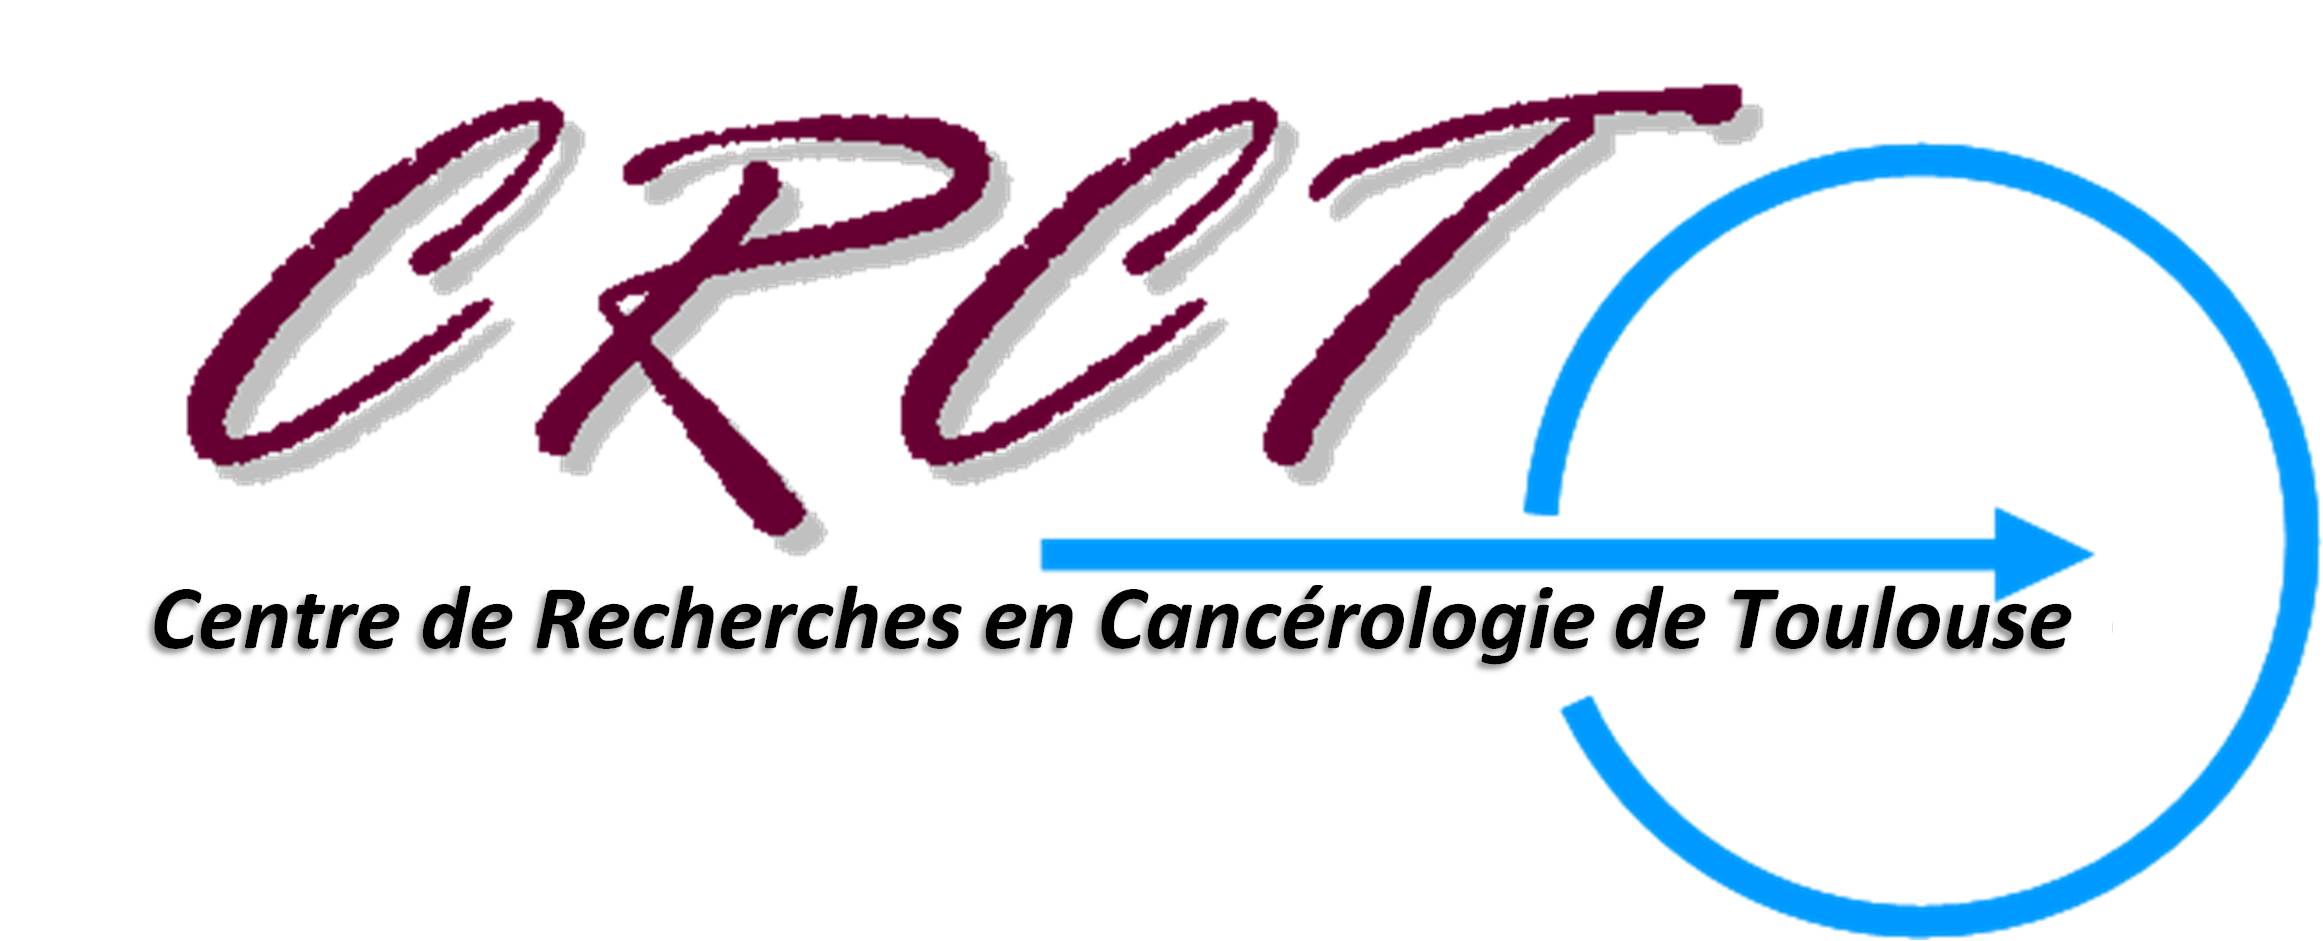 Cancer Research Center of Toulouse - CRCT